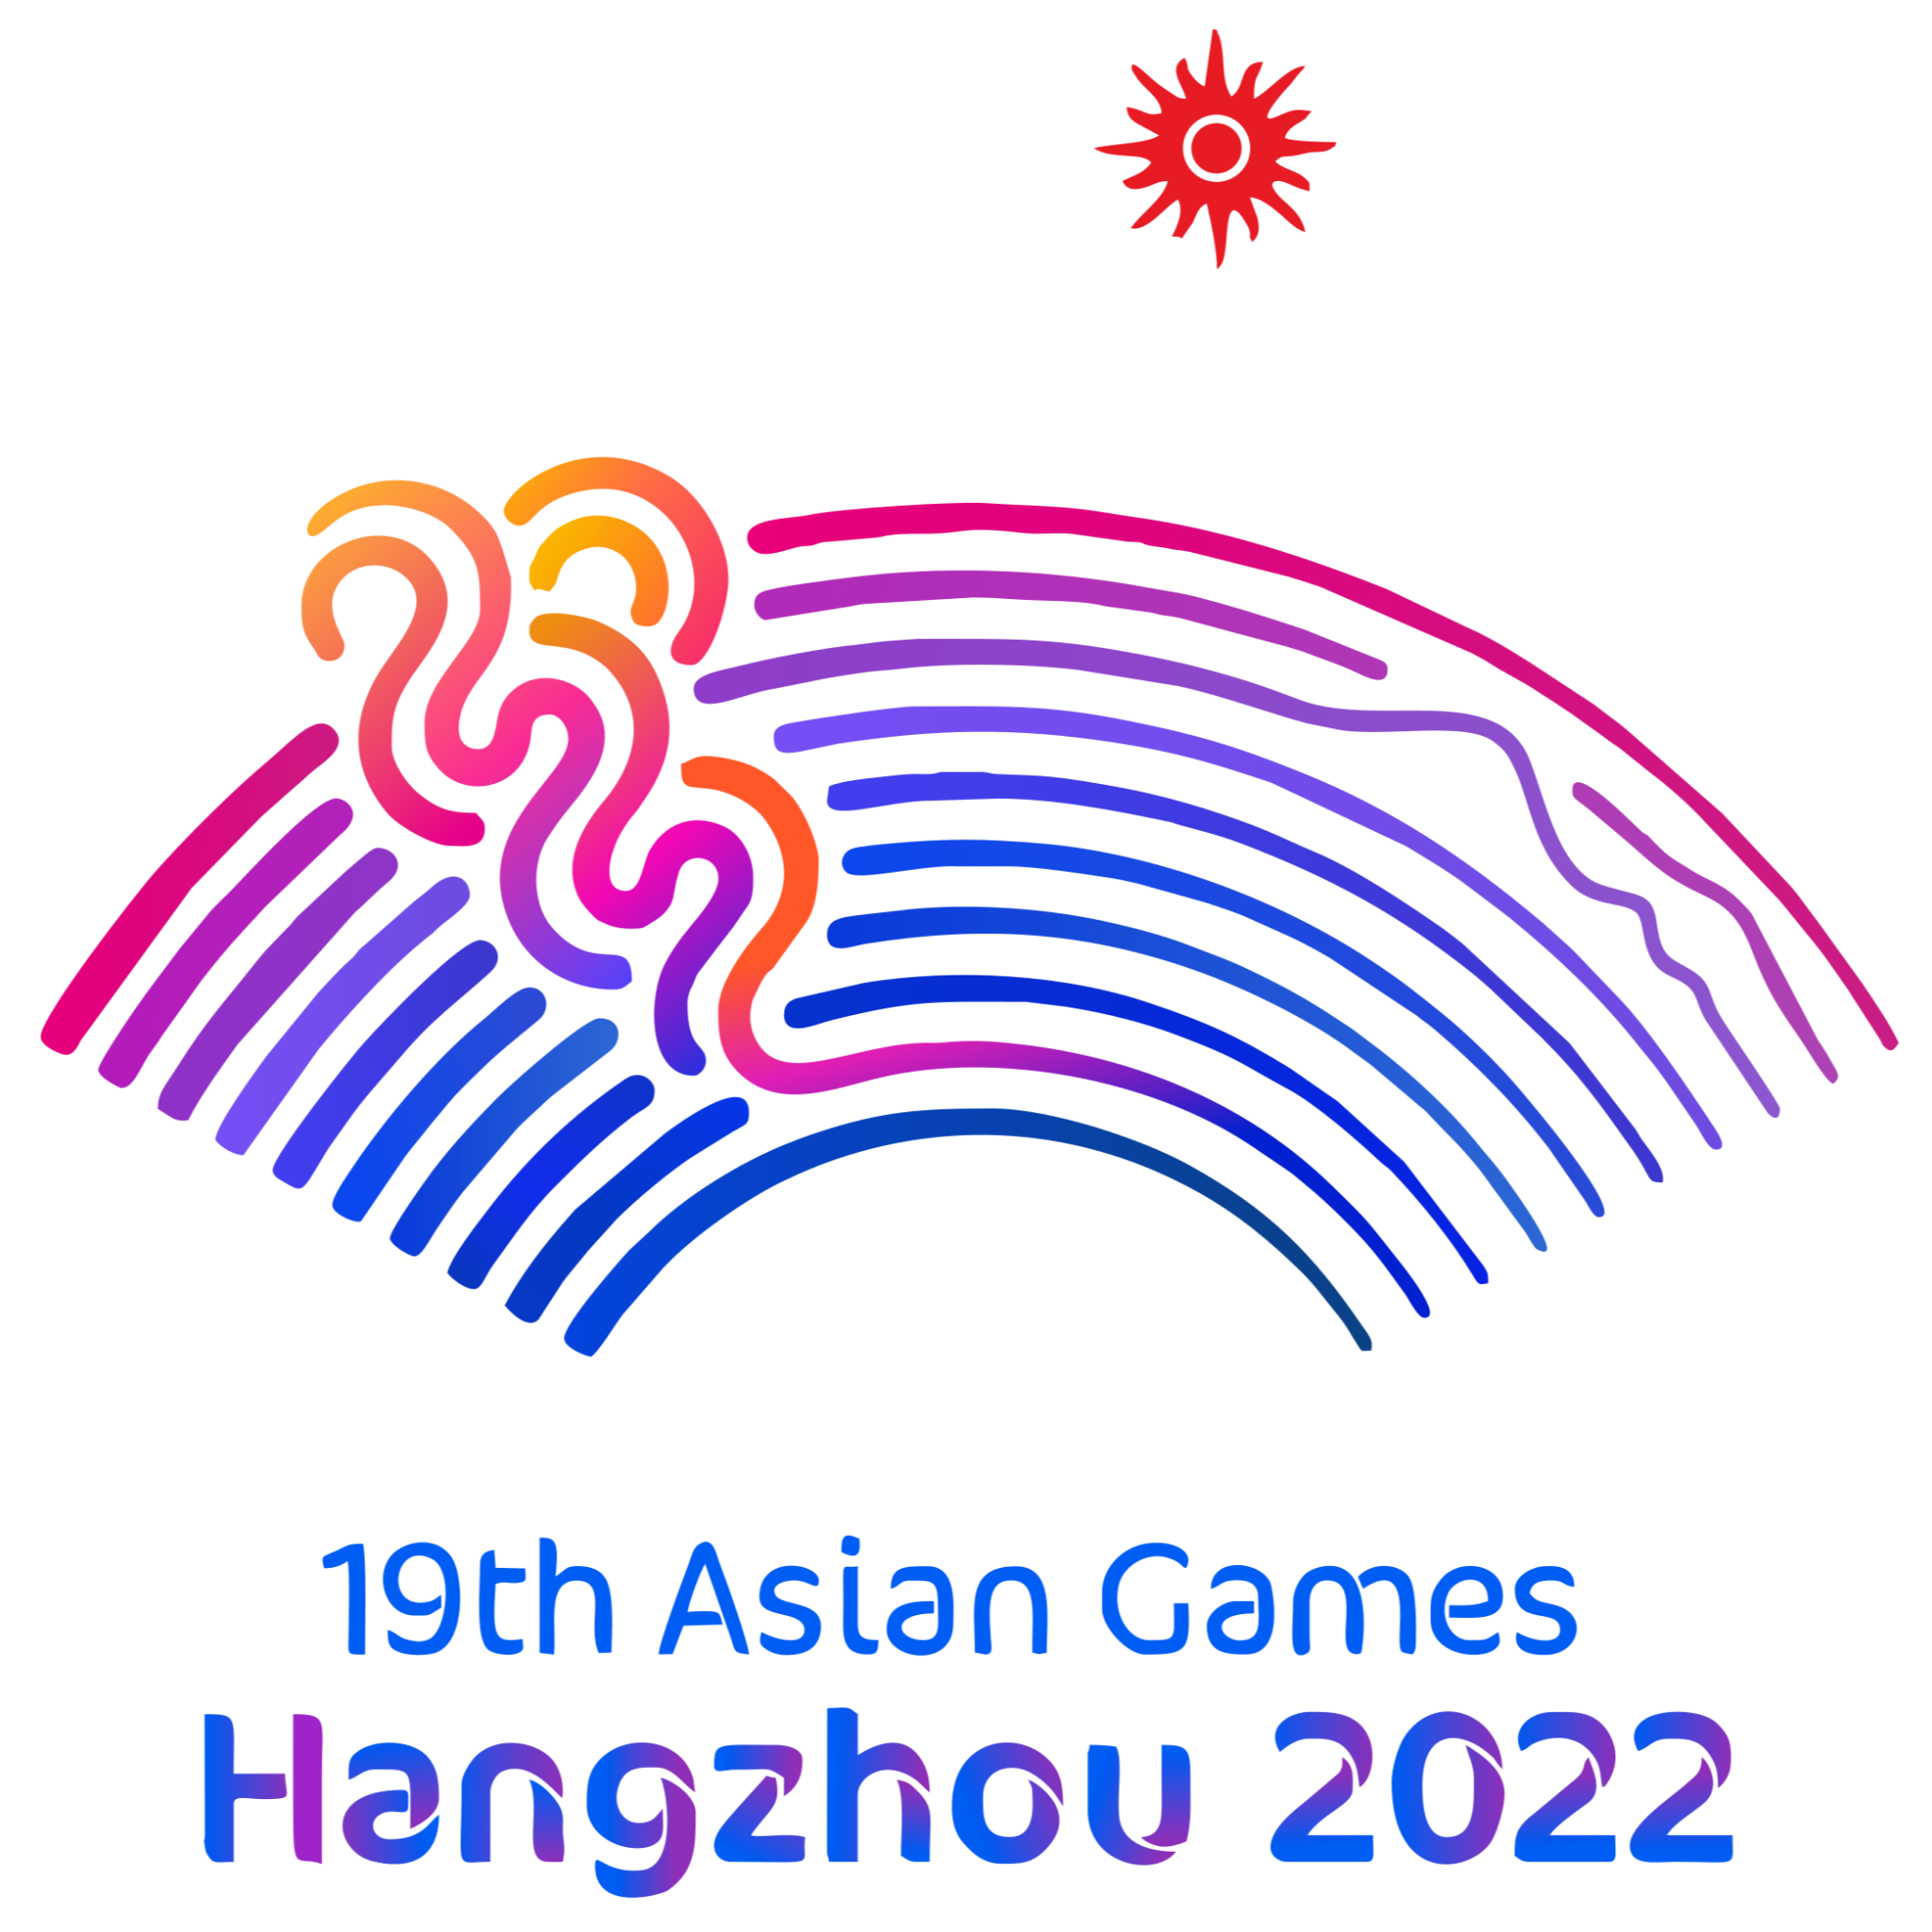 Nepal to send 253 athletes to take part in Asian Games